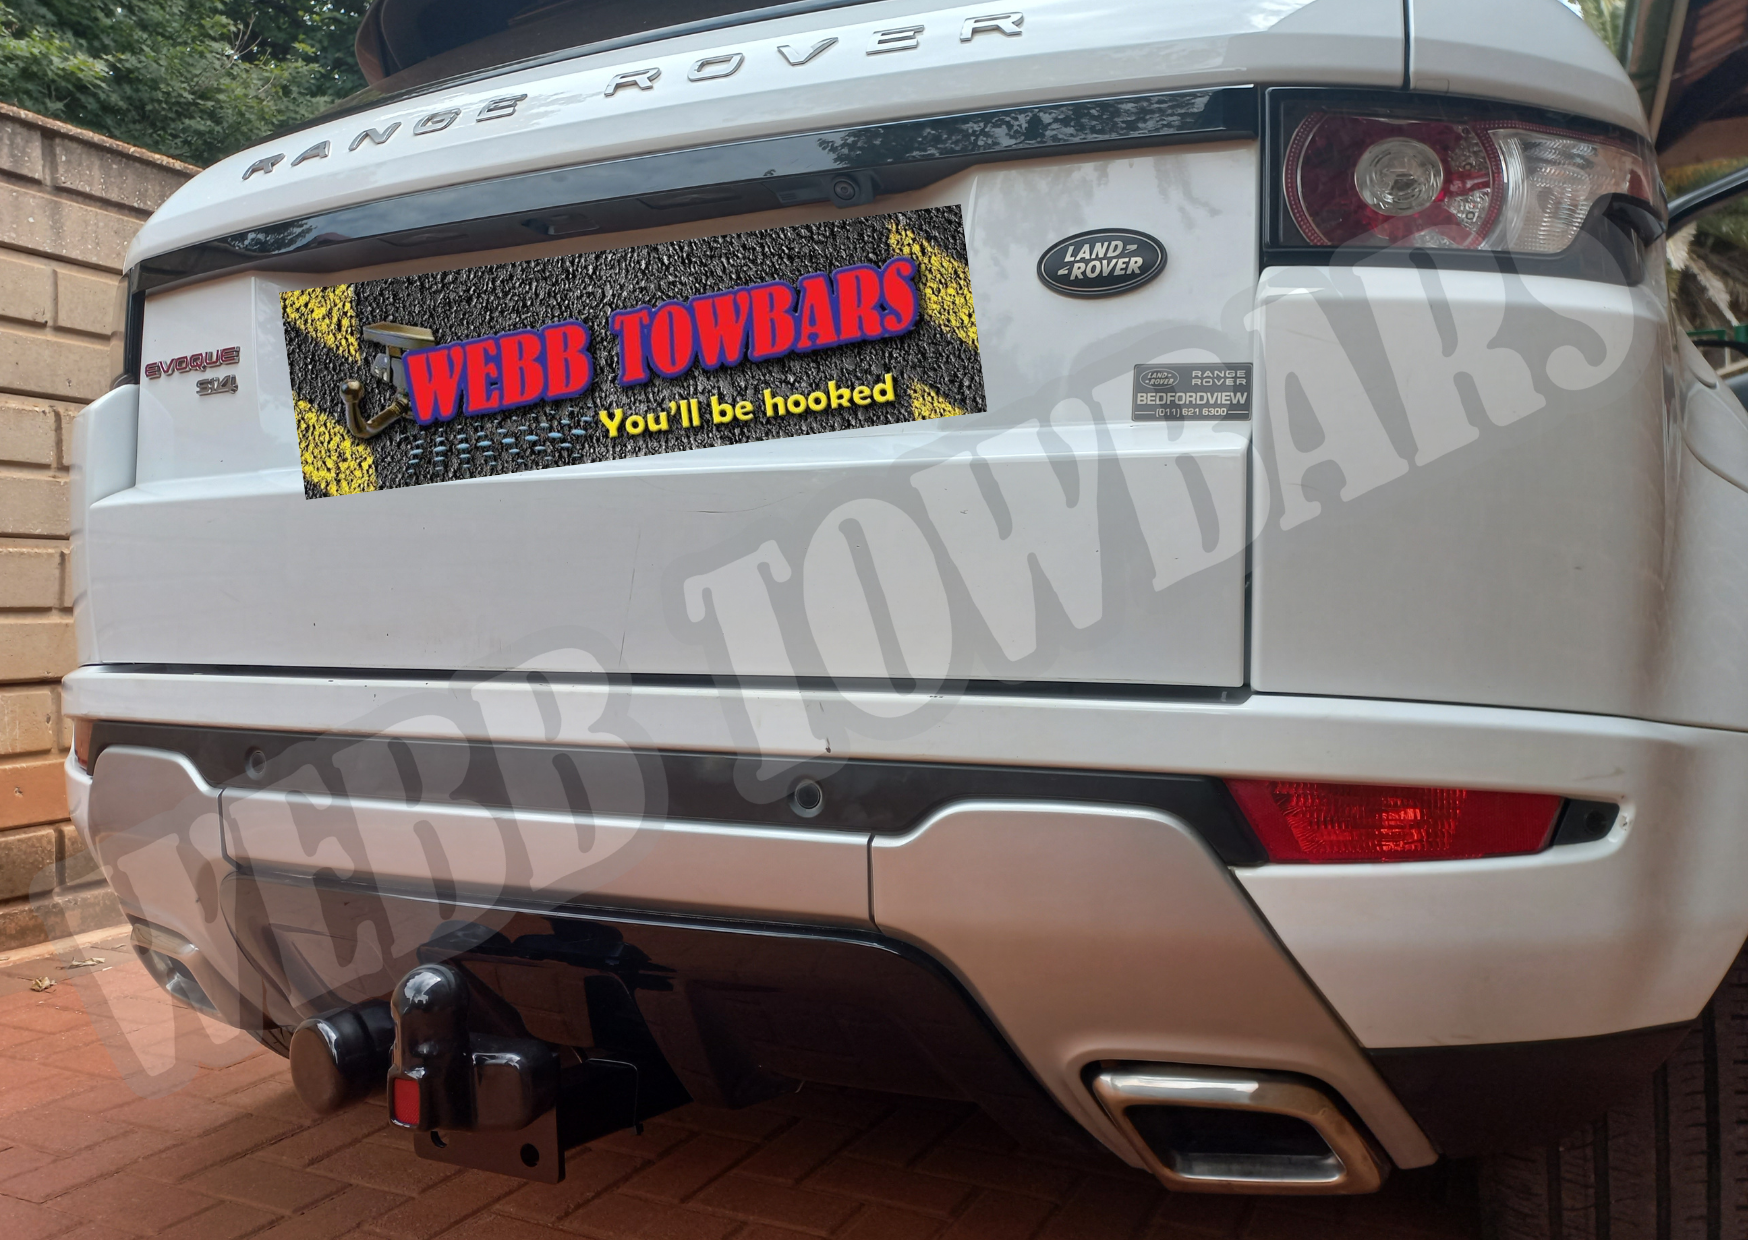 Webb Towbars - Land Rover Range Rover Evoque Standard Towbar Installation in Gauteng, South Africa - Premium Towing Solutions for Your Evoque